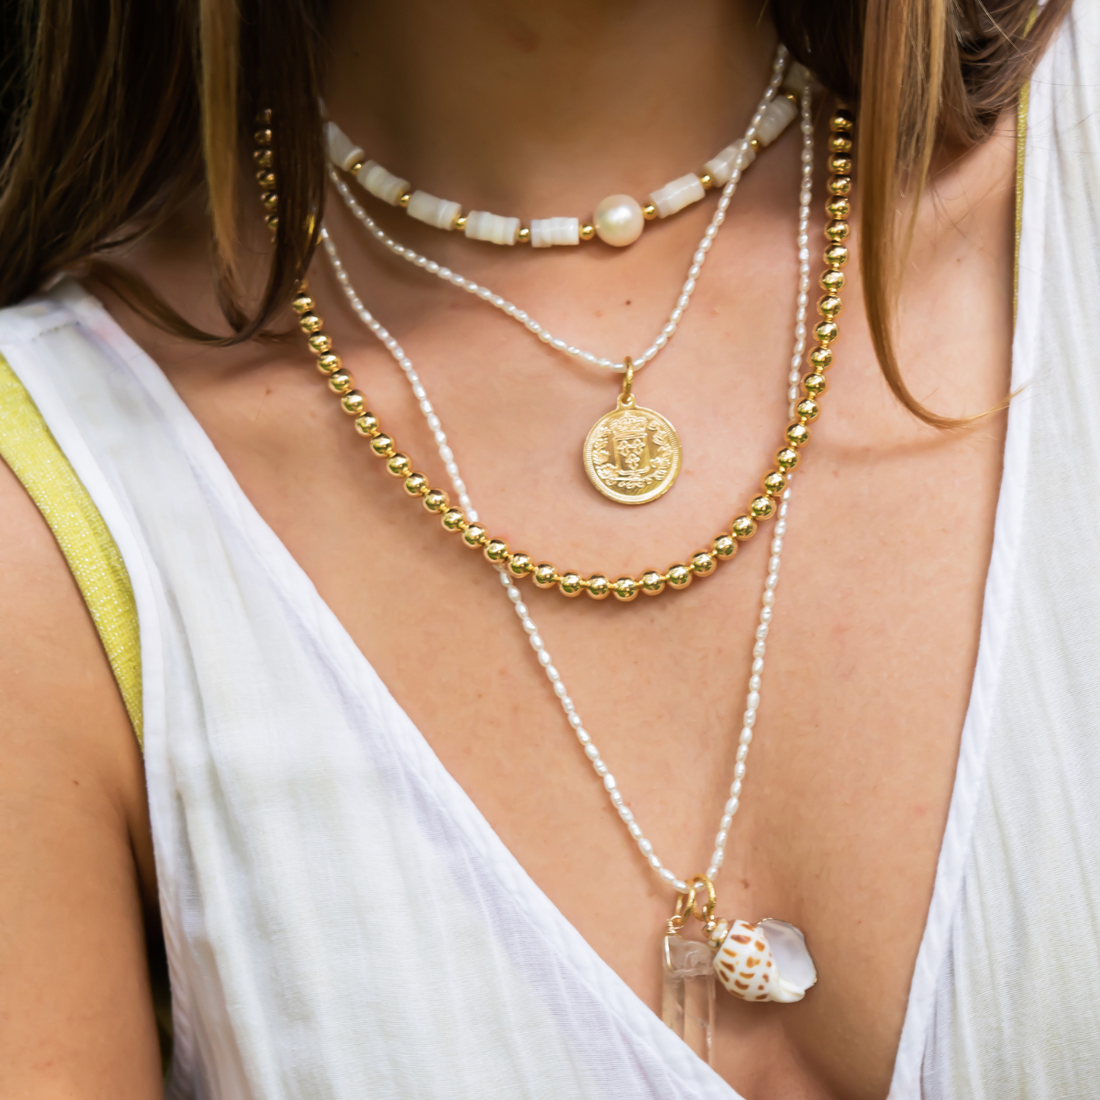 Coco Pearl Pukka - Shop Summer Jewelry | MCHARMS